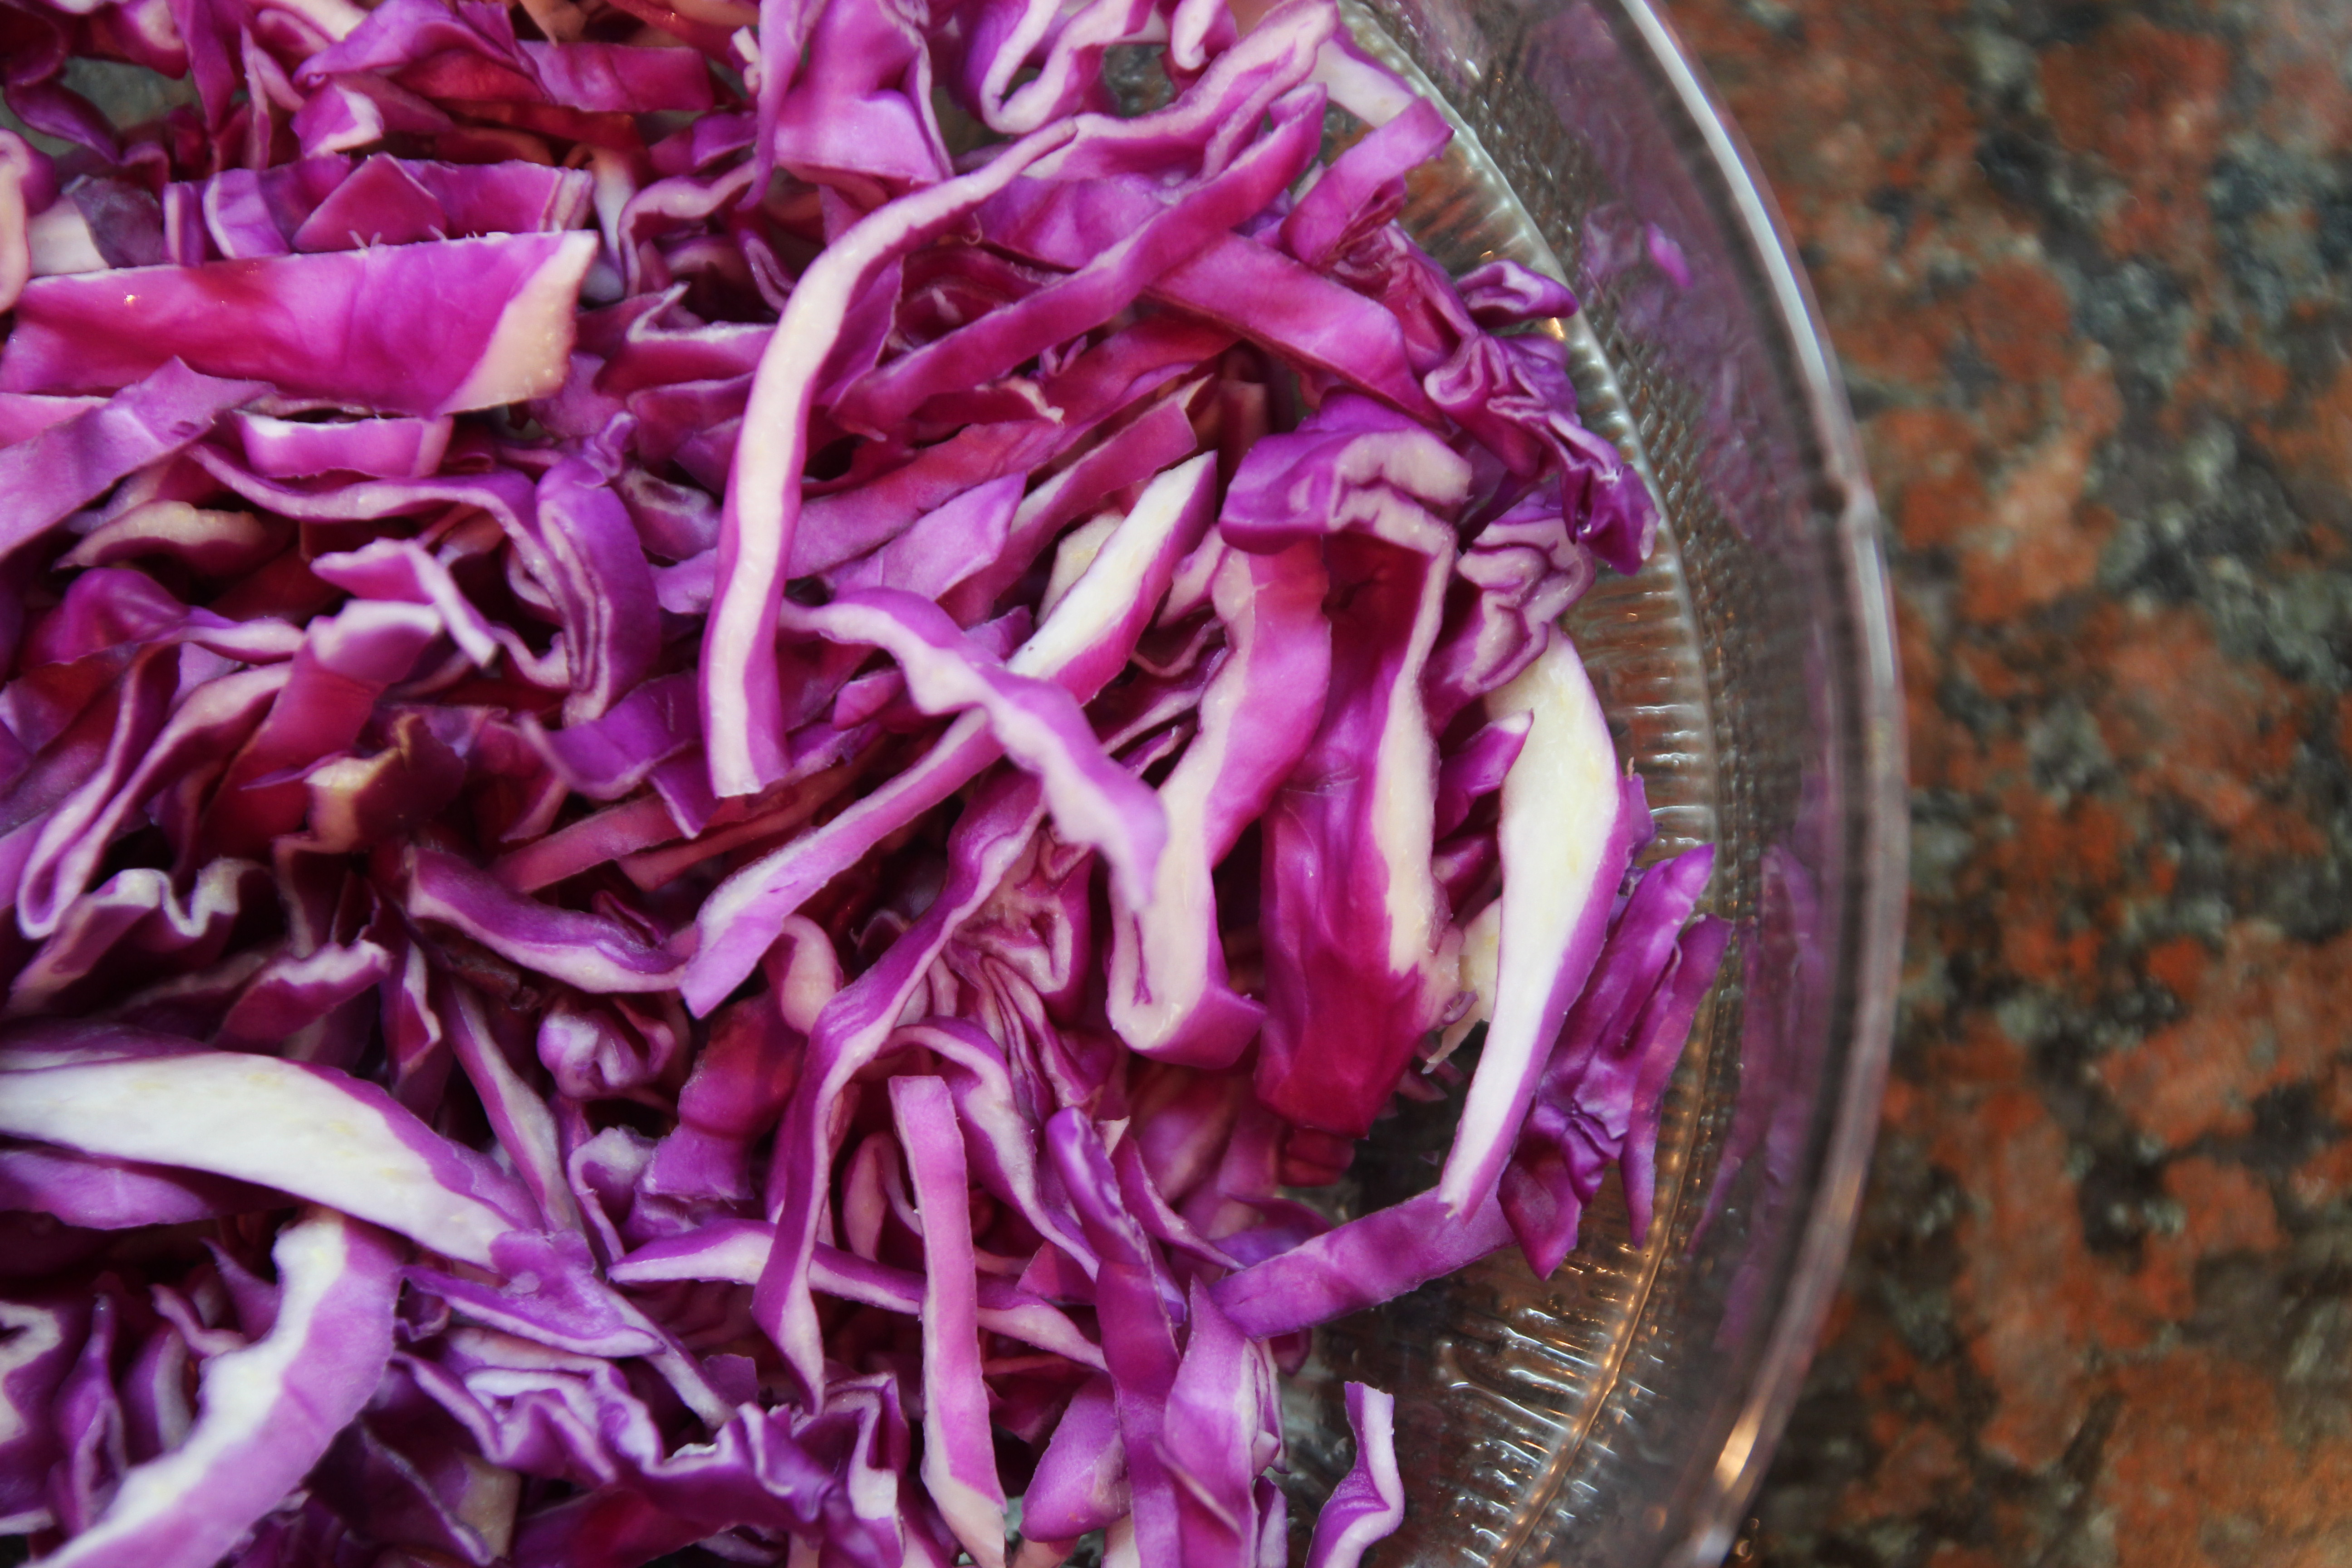 Spring Onion, Red Cabbage & Carrot Salad1